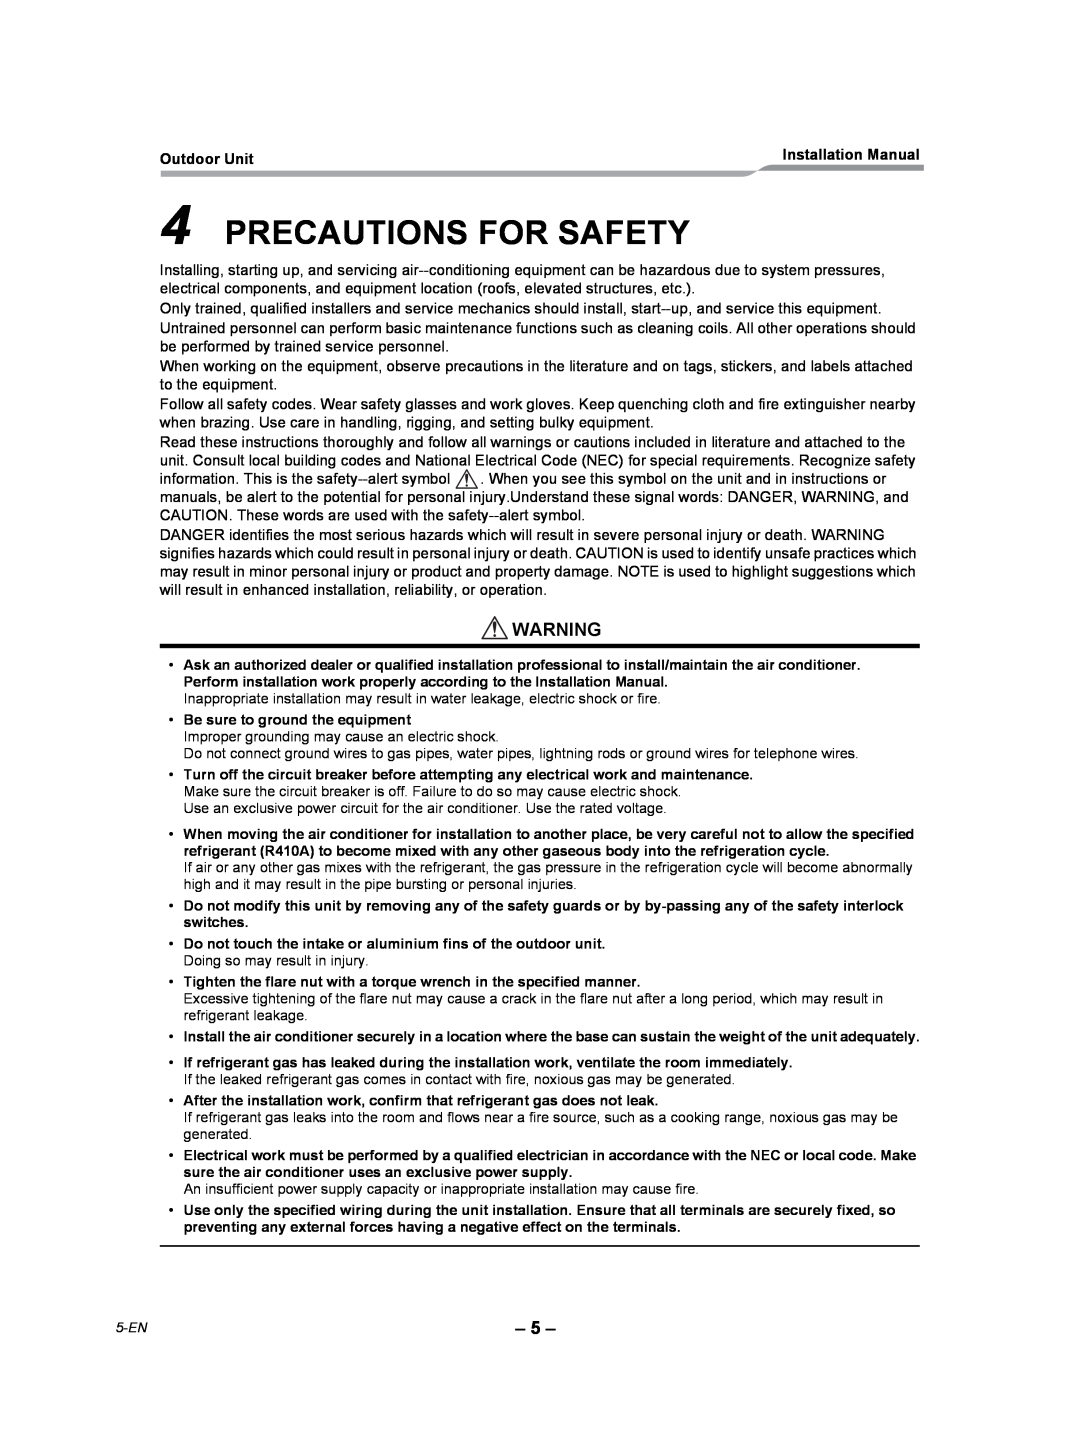 Toshiba RAV-SP360AT2-UL, RAV-SP300AT2-UL, RAV-SP420AT2-UL installation manual Precautions For Safety 